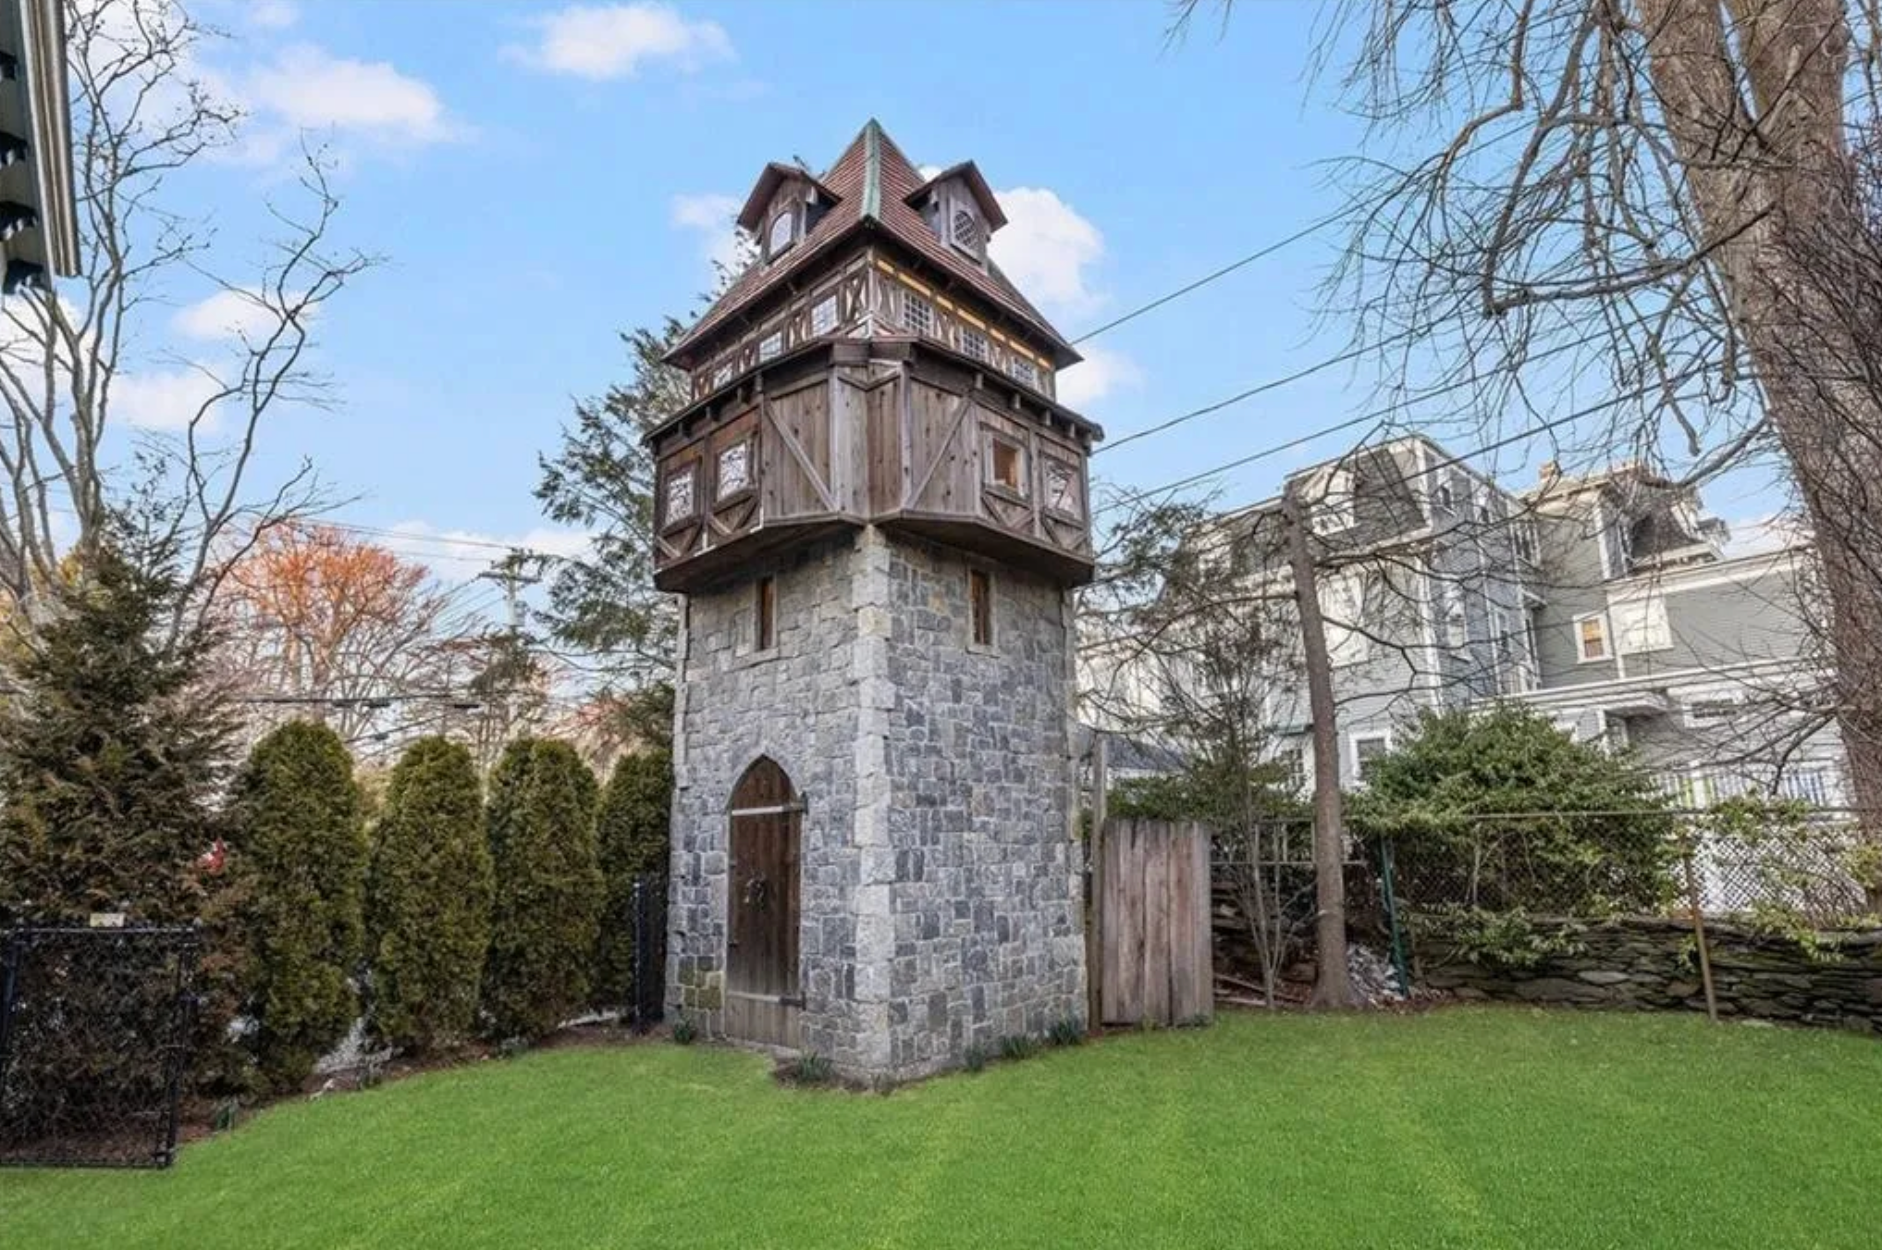 The home has a three-story watchtower in its back yard.